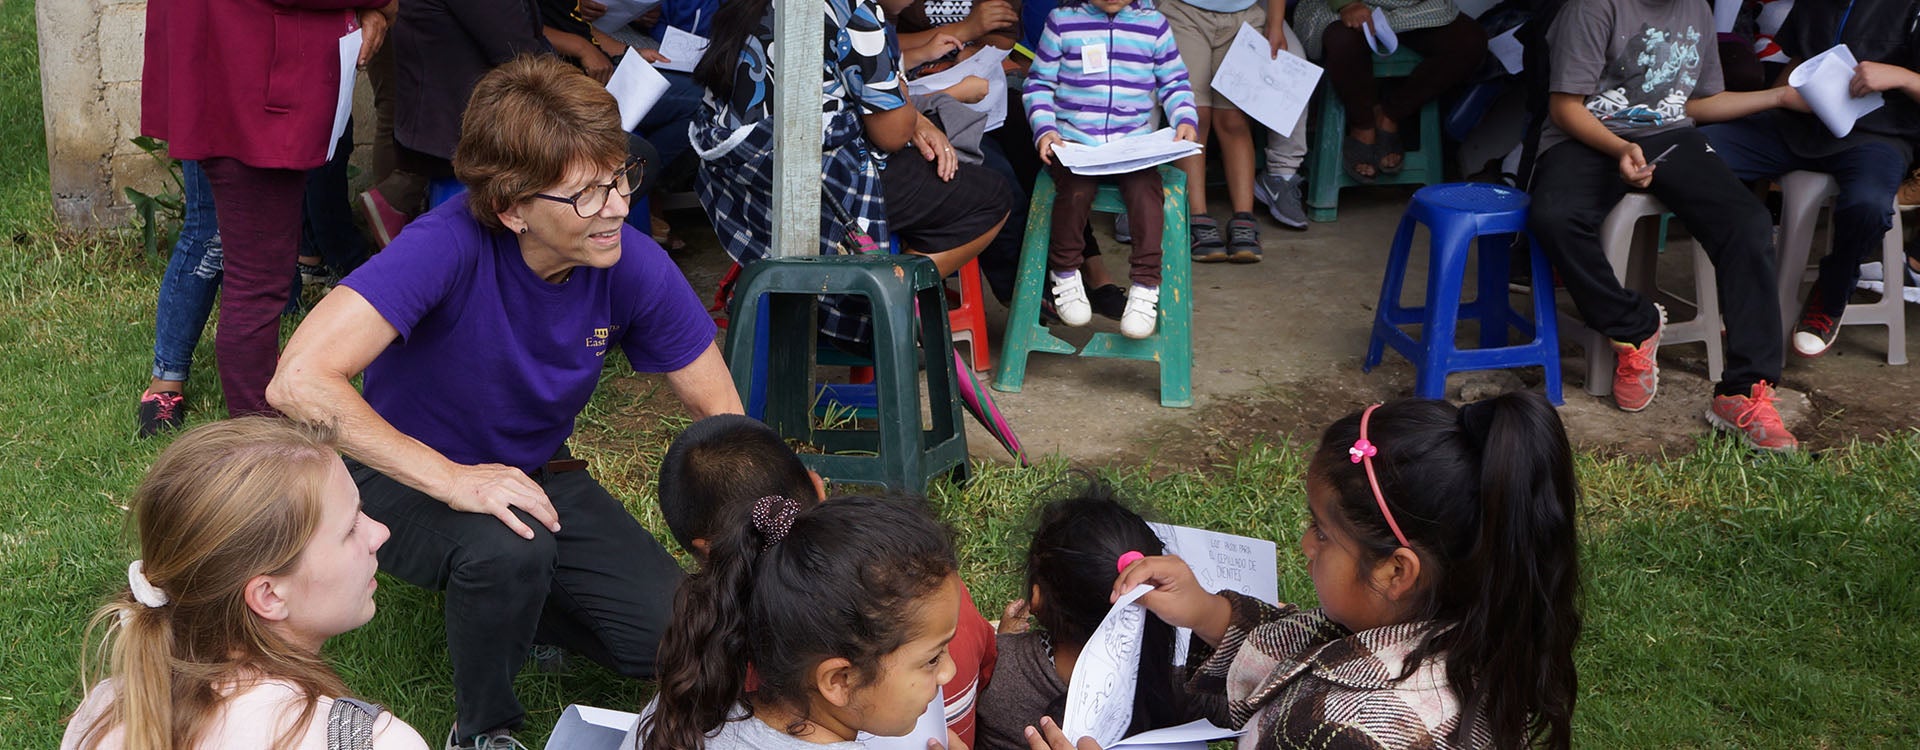 Larson speaks with Guatemalan children about oral health during an ECU nursing student-run education engagement in Guatemala.